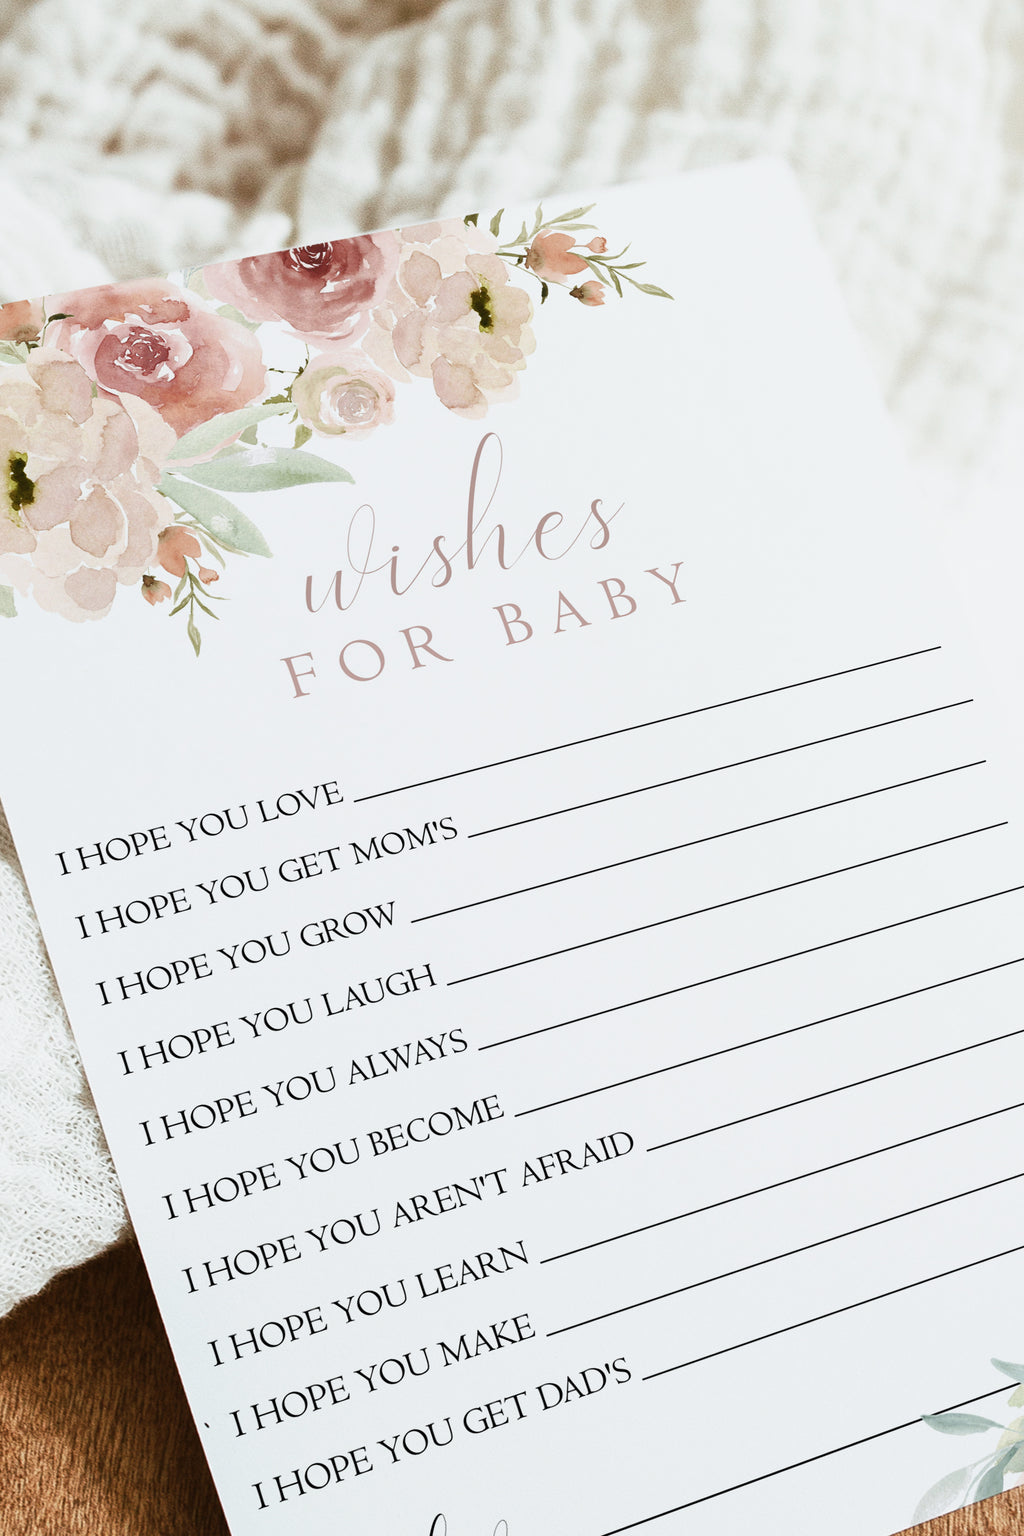 Baby Well Wishes and Advice | www.foreveryourprints.com